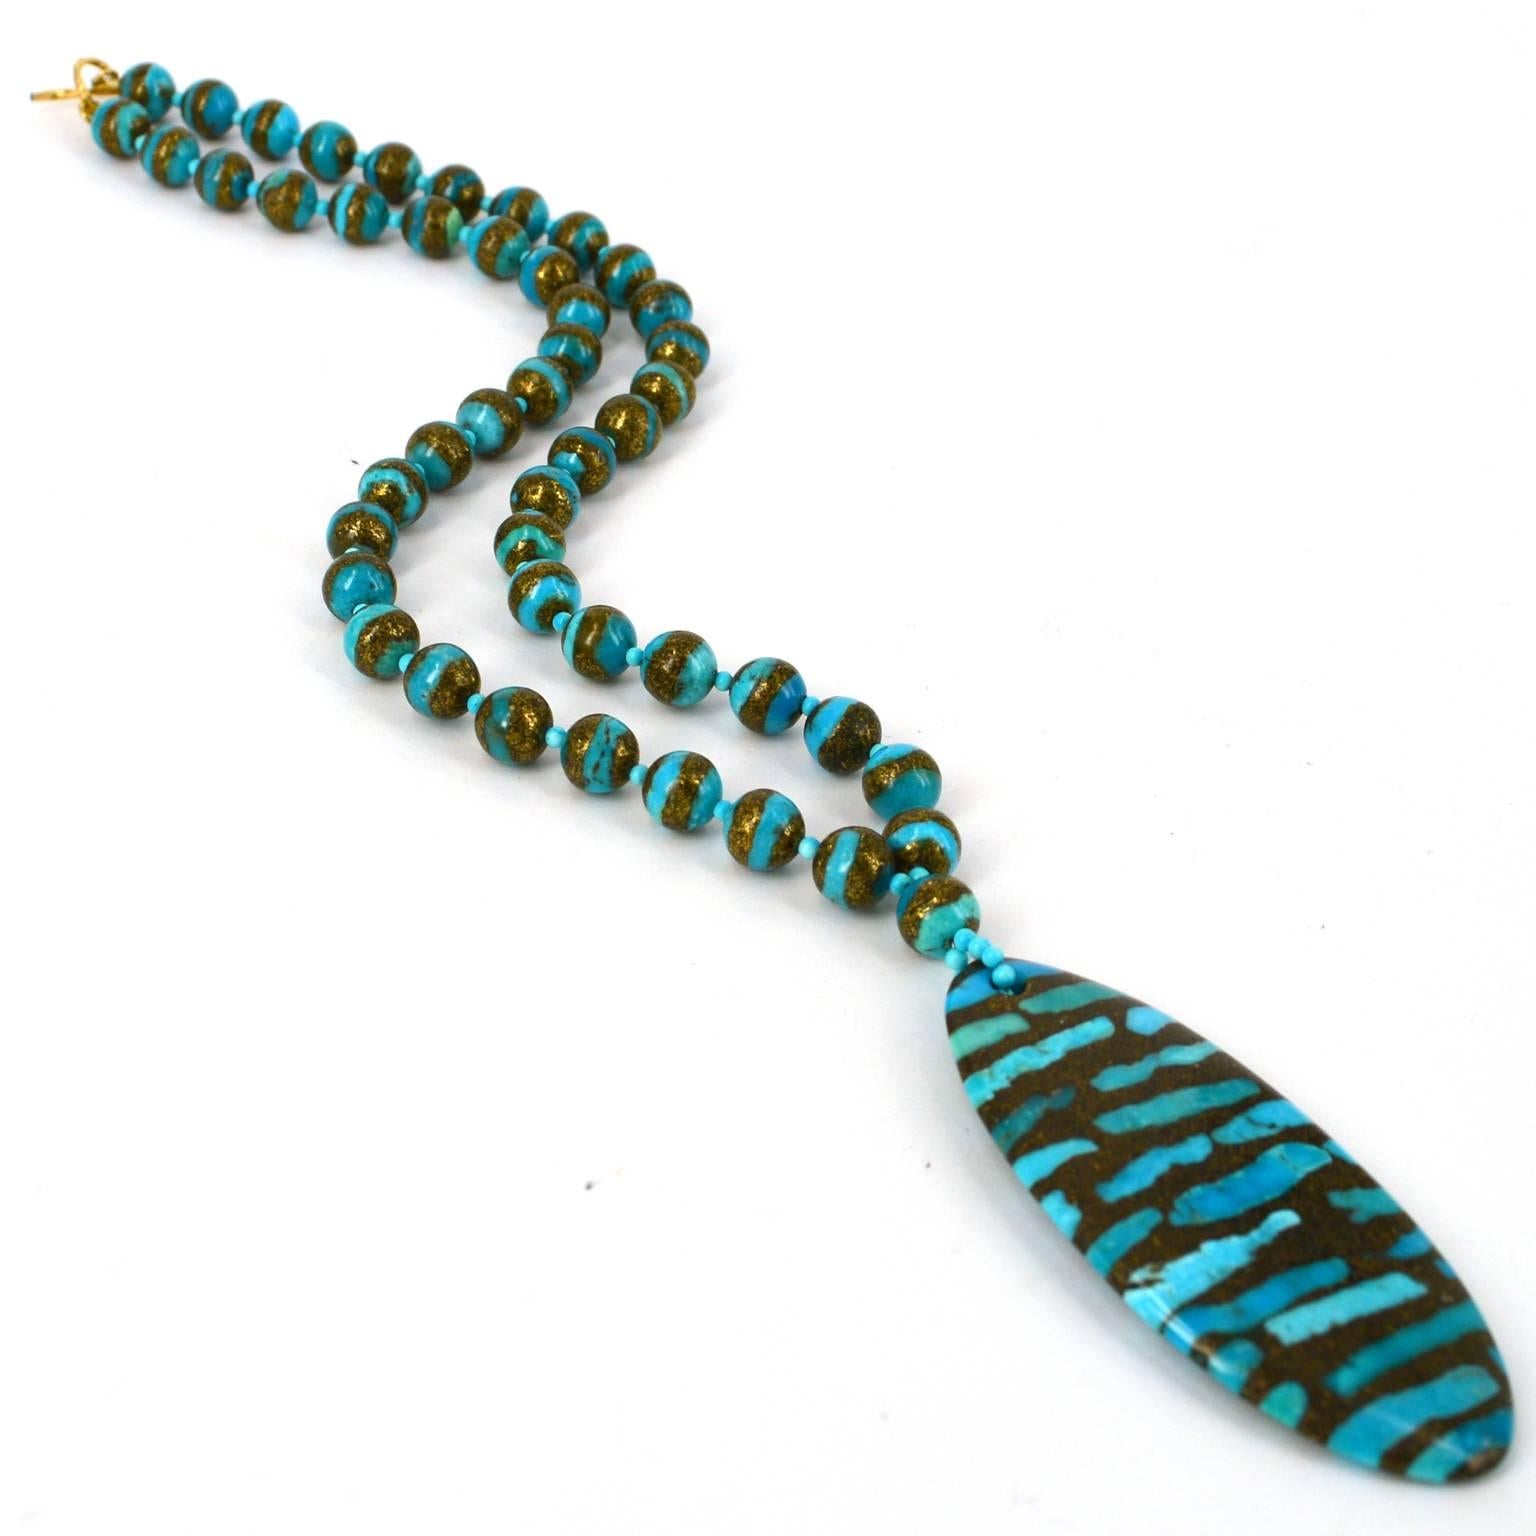 Vibrant Turquoise slices set into compressed Copper granules this necklace and earrings set makes a bold statement. 
Necklace comes with a matching pair of earrings made with 14k Gold Filled findings, finished length of earrings is 25mm 
Necklace